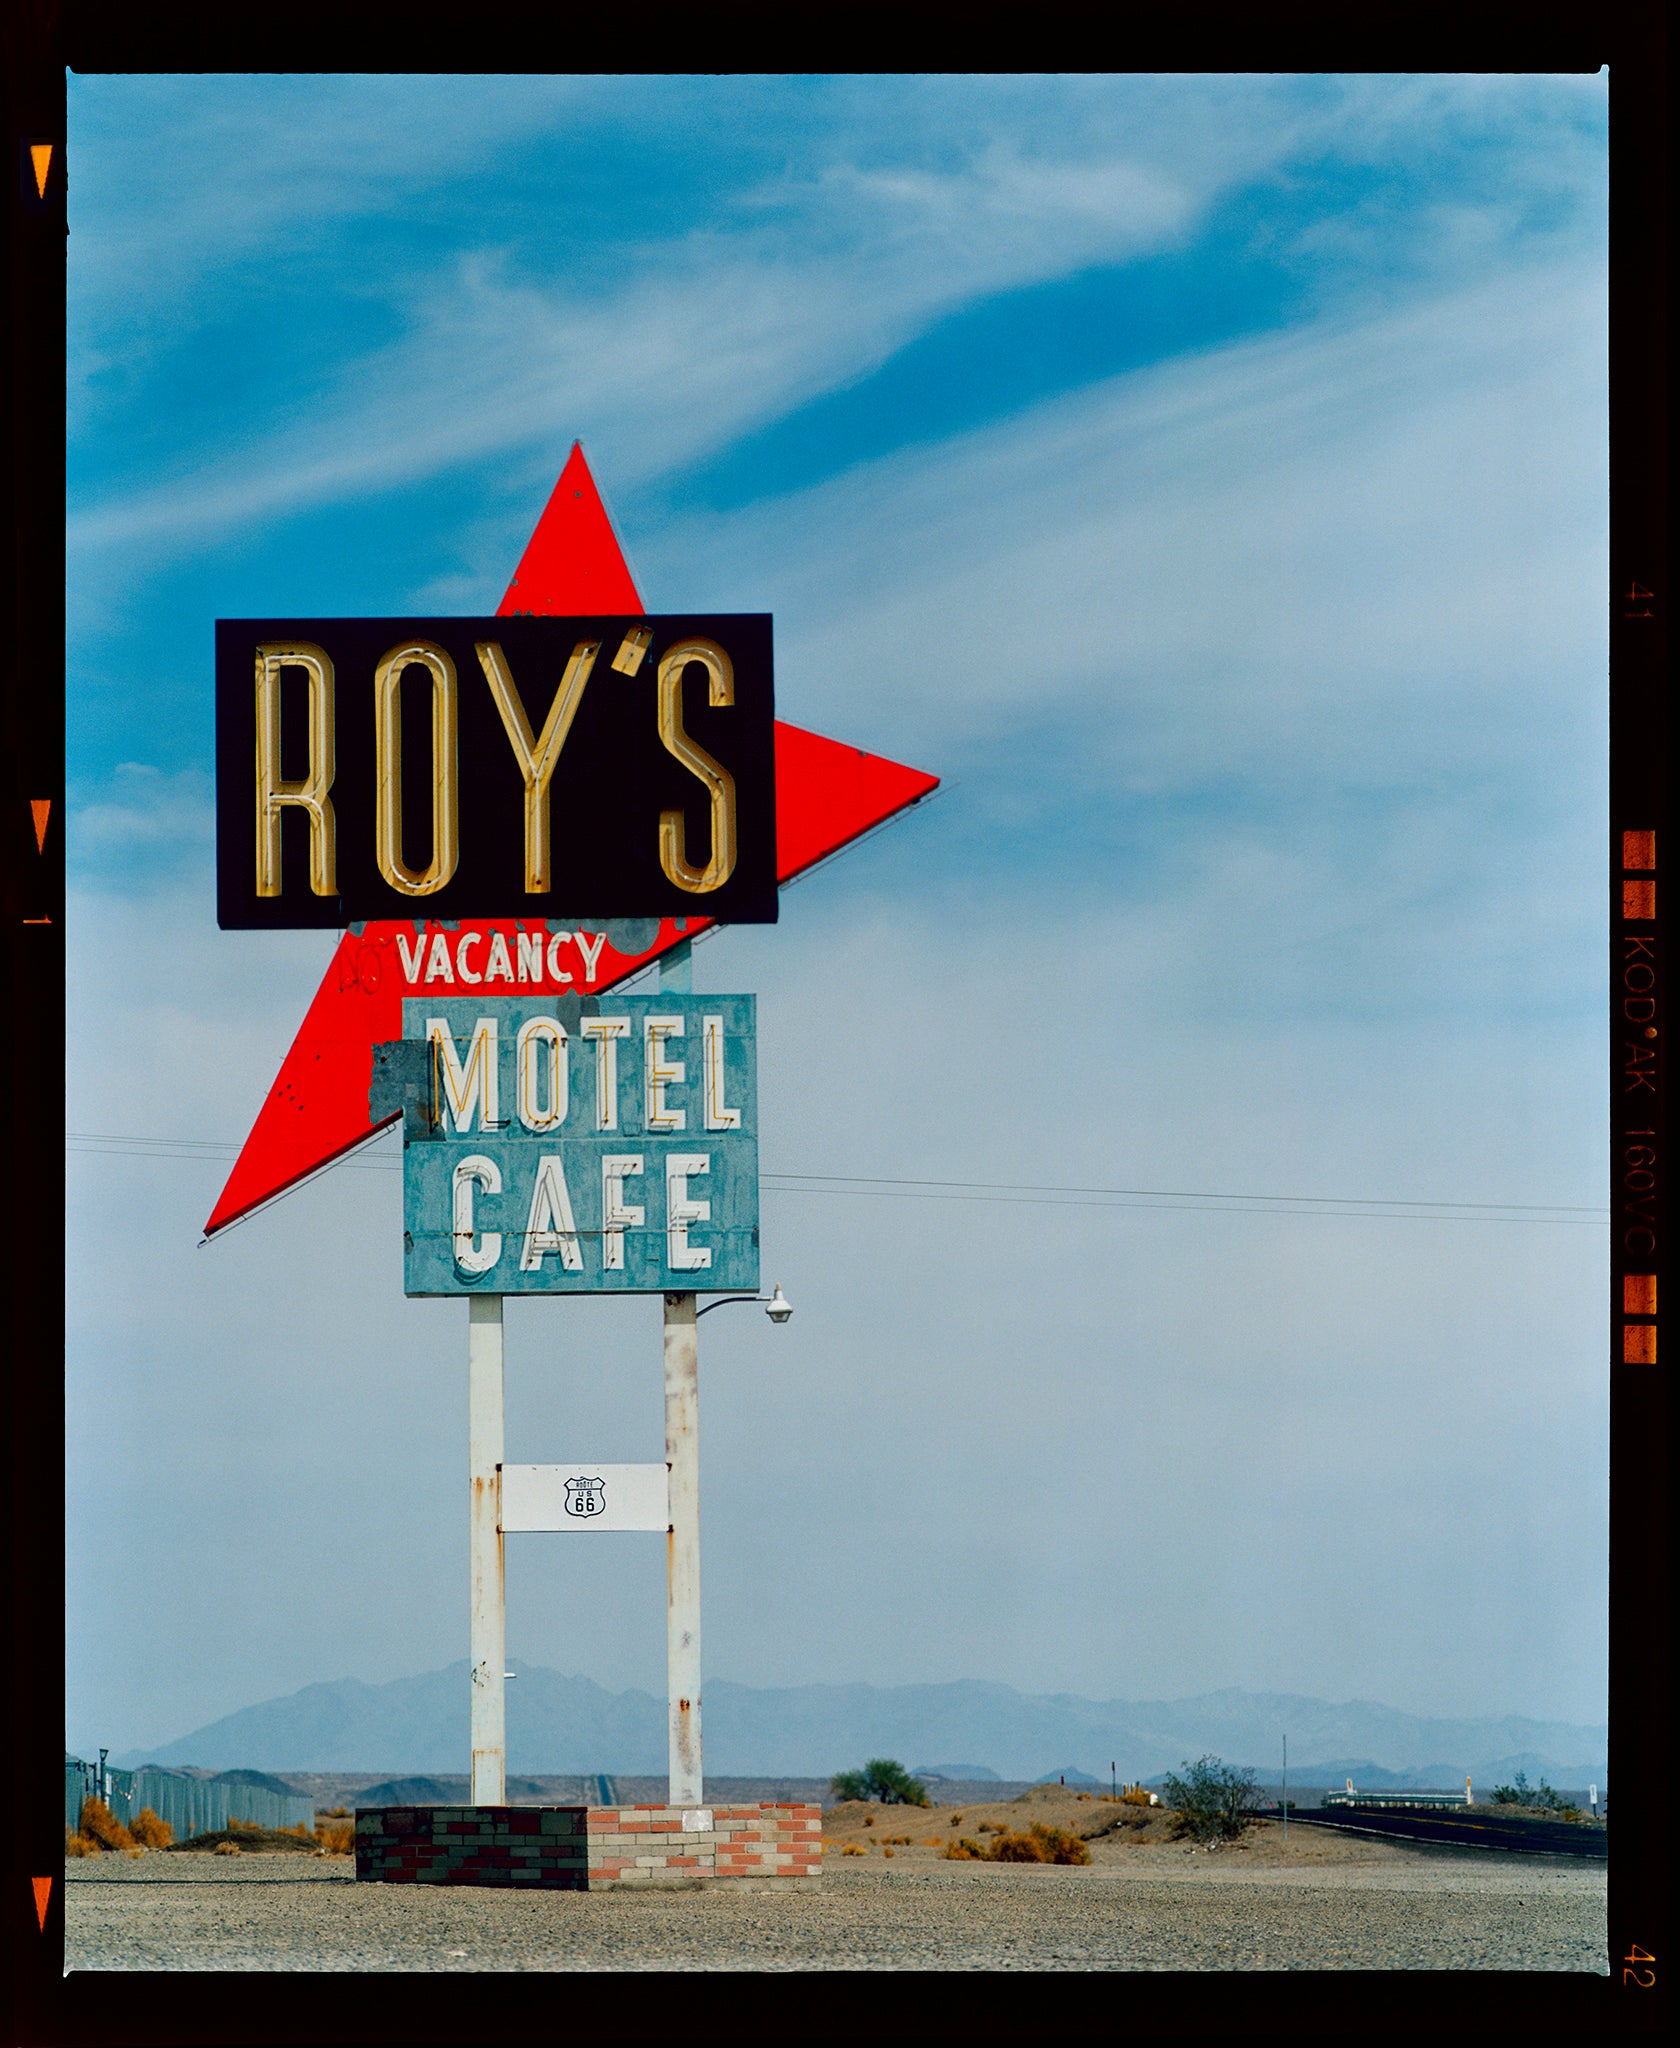 Photograph by Richard Heeps edged by film rebate. A roadside sign on Route 66 in America. The word ROY'S appears in a black sign with a bit red arrow pointing to the left ground, below this VACANCY and on a green square the words MOTEL and CAFE.